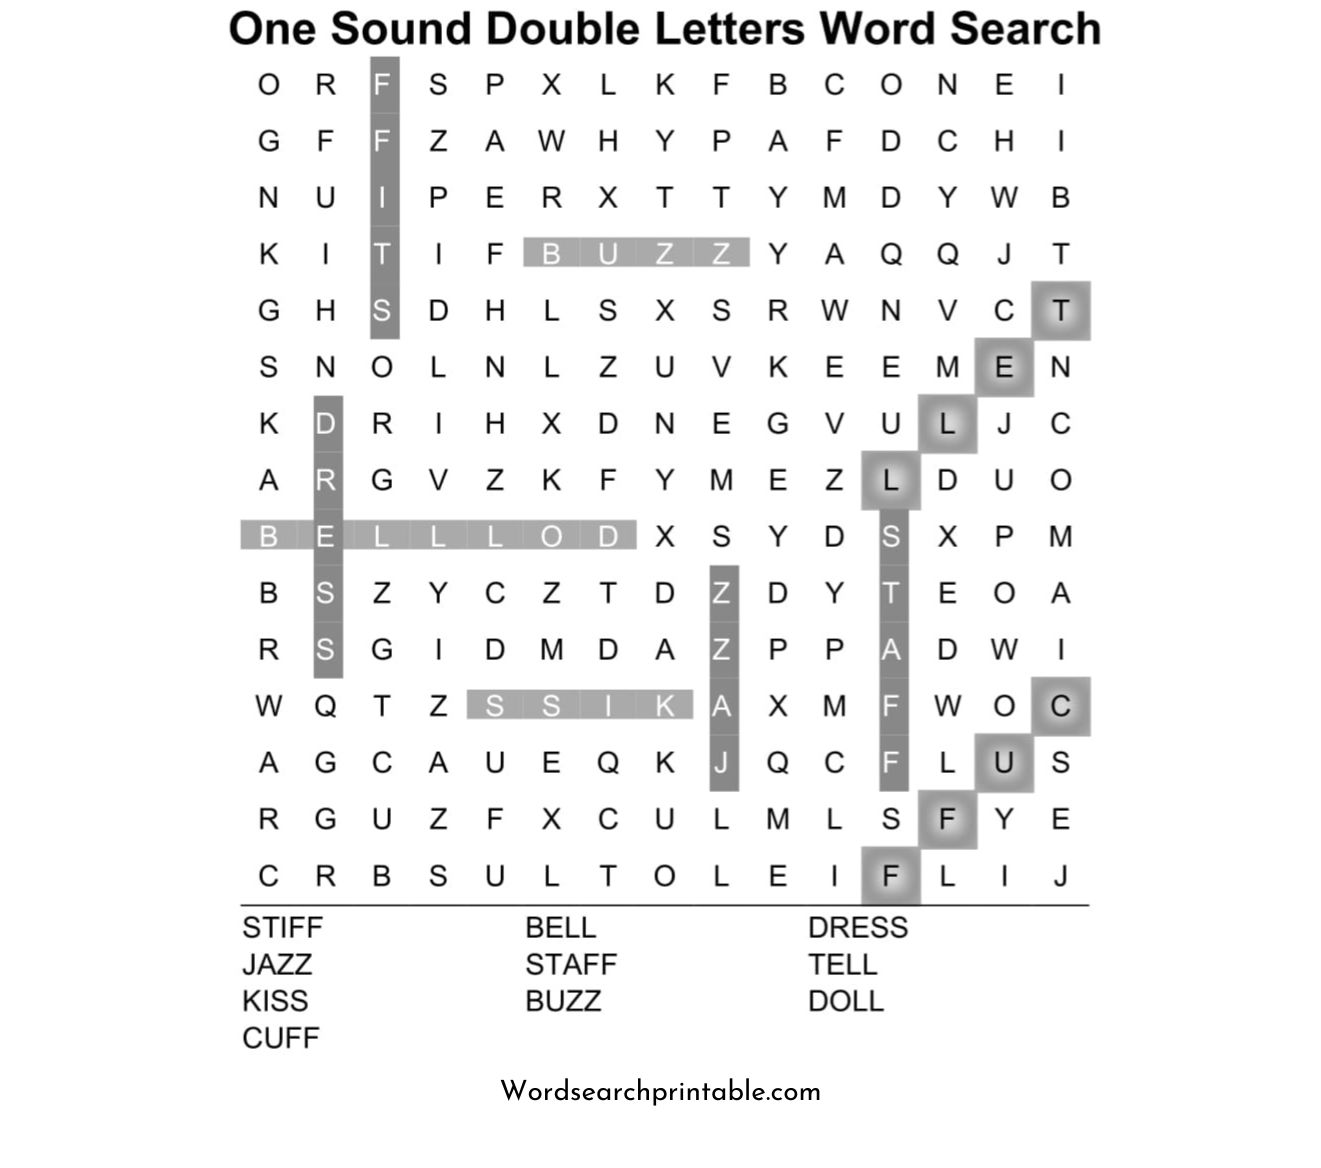 one sound double letters word search puzzle solution